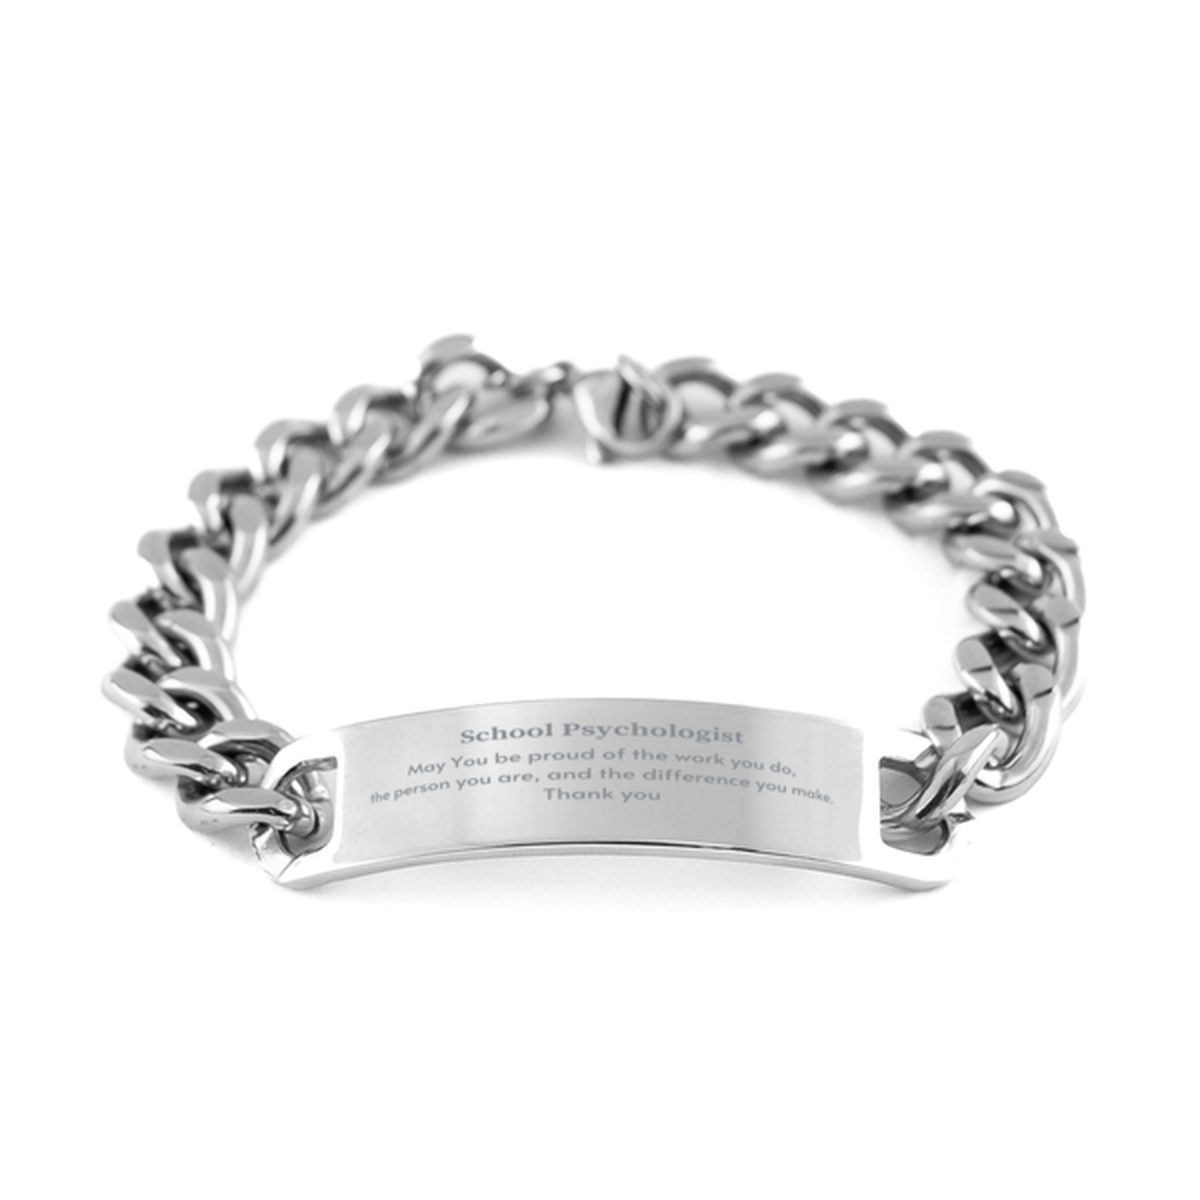 Heartwarming Cuban Chain Stainless Steel Bracelet Retirement Coworkers Gifts for School Psychologist, School Psychologist May You be proud of the work you do, the person you are Gifts for Boss Men Women Friends